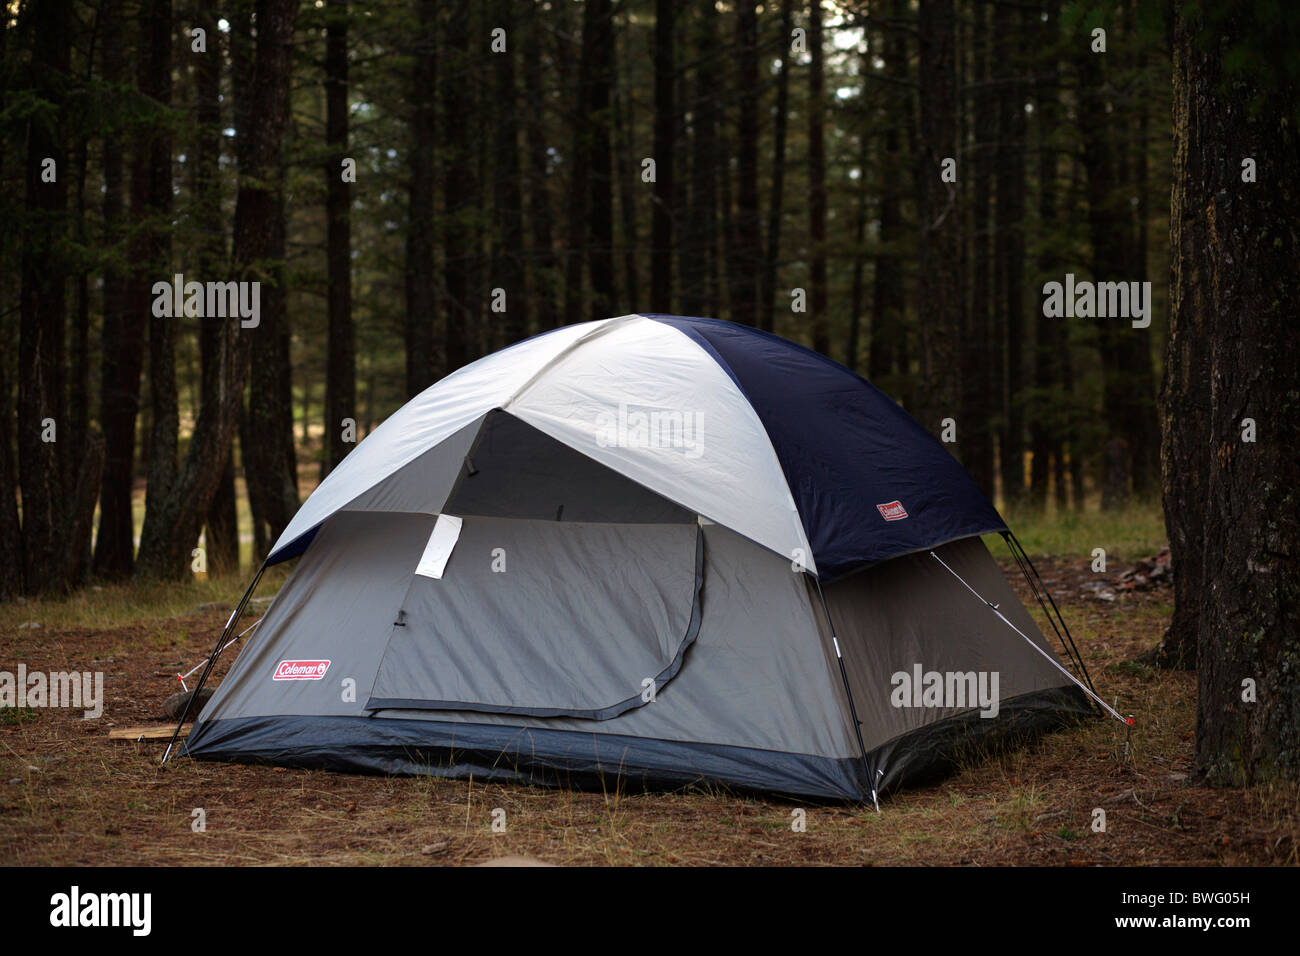 A tent pitched in the Mid-West backcountry of the United States of America Stock Photo